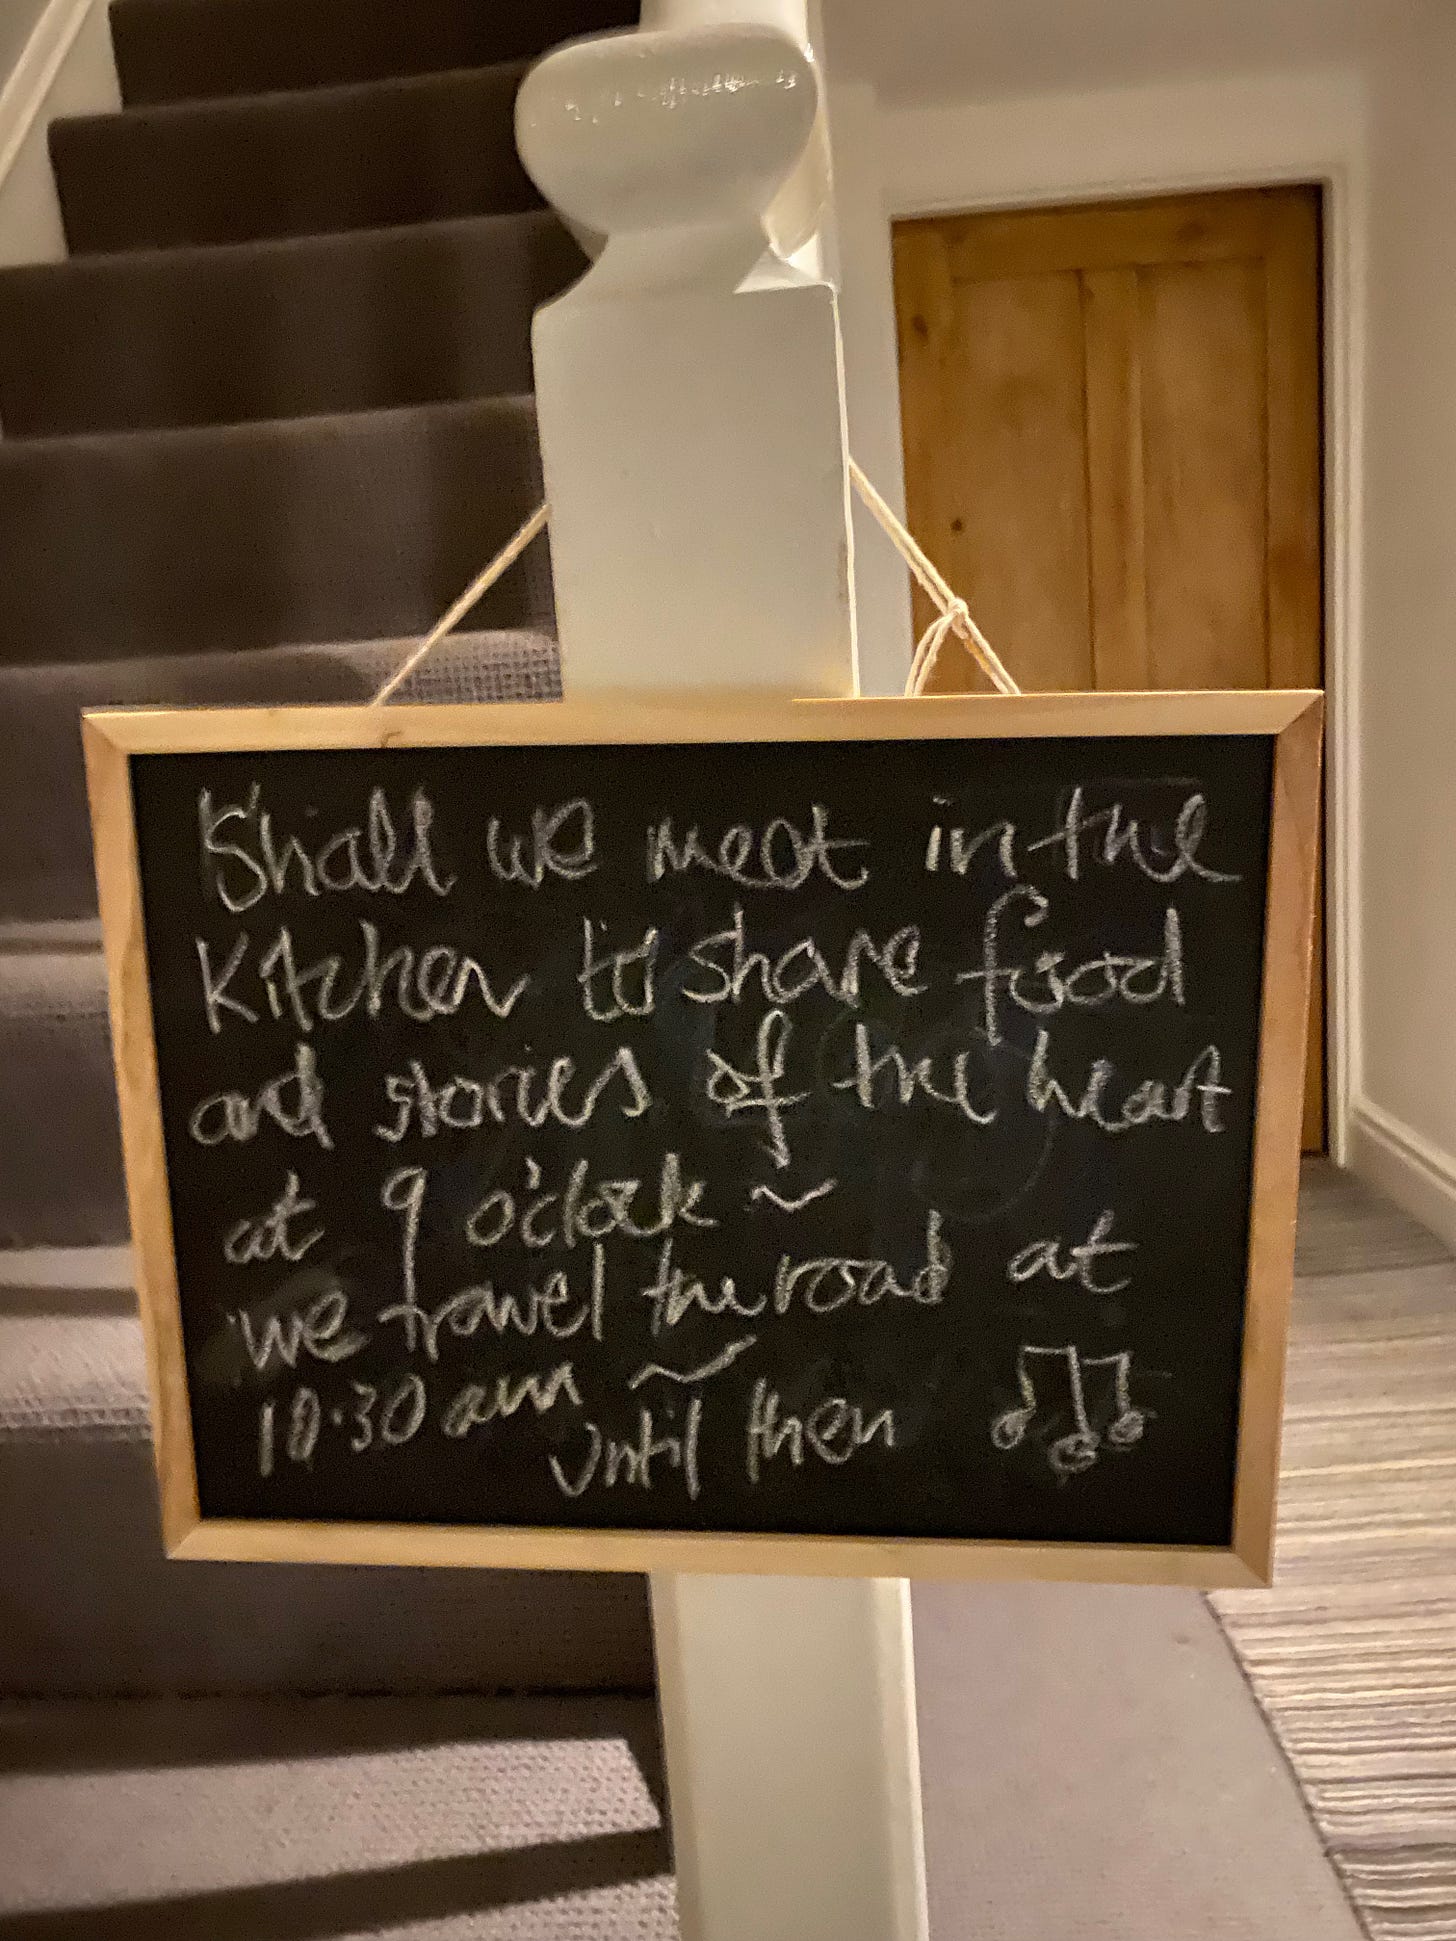 Picture of a chalkboard with Starlite's poem "Shall we meet to share food and stories of the heart at 9 o'clock. We travel the road at 10:30 am - until then"